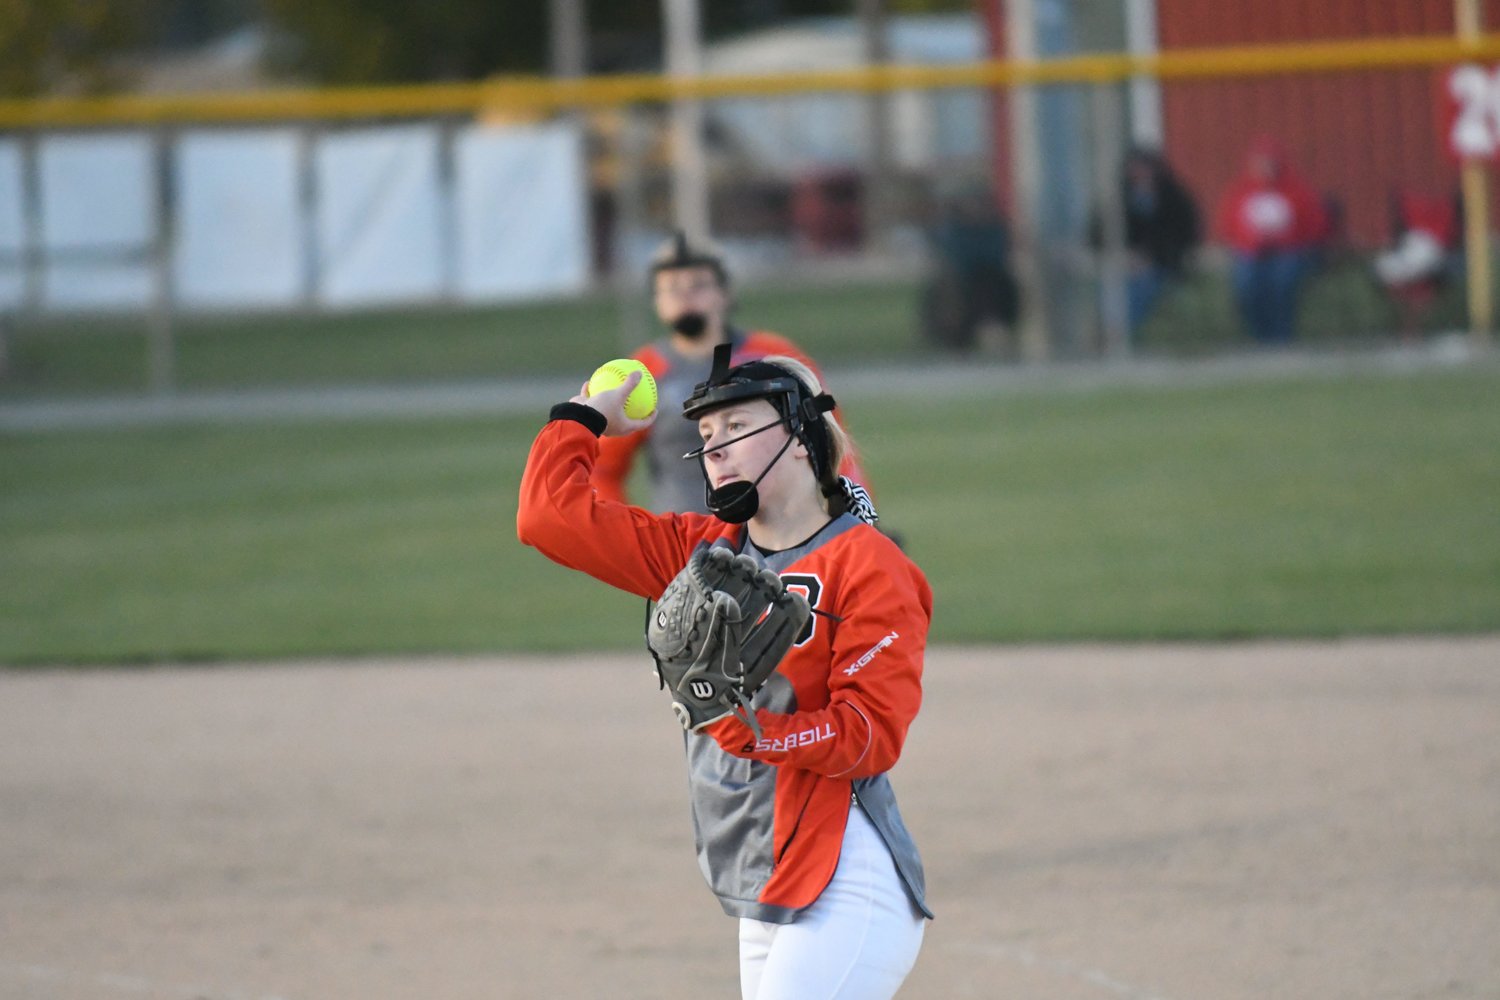 Brashear senior second baseman Callie Althide fields a ground ball and throws to first for an out.